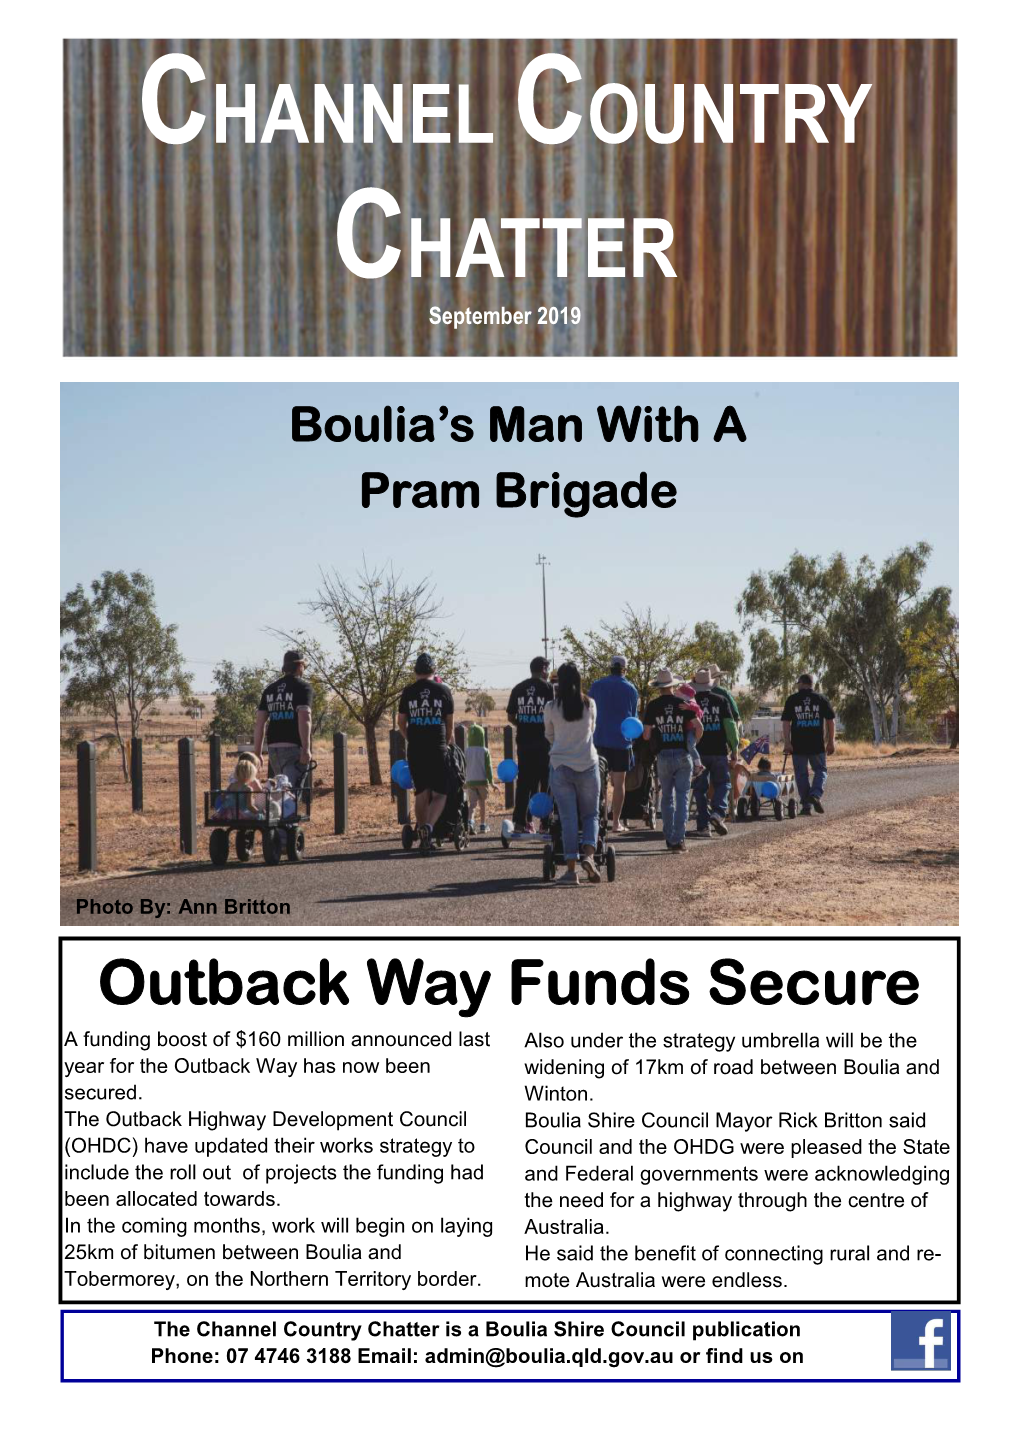 Outback Way Funds Secure